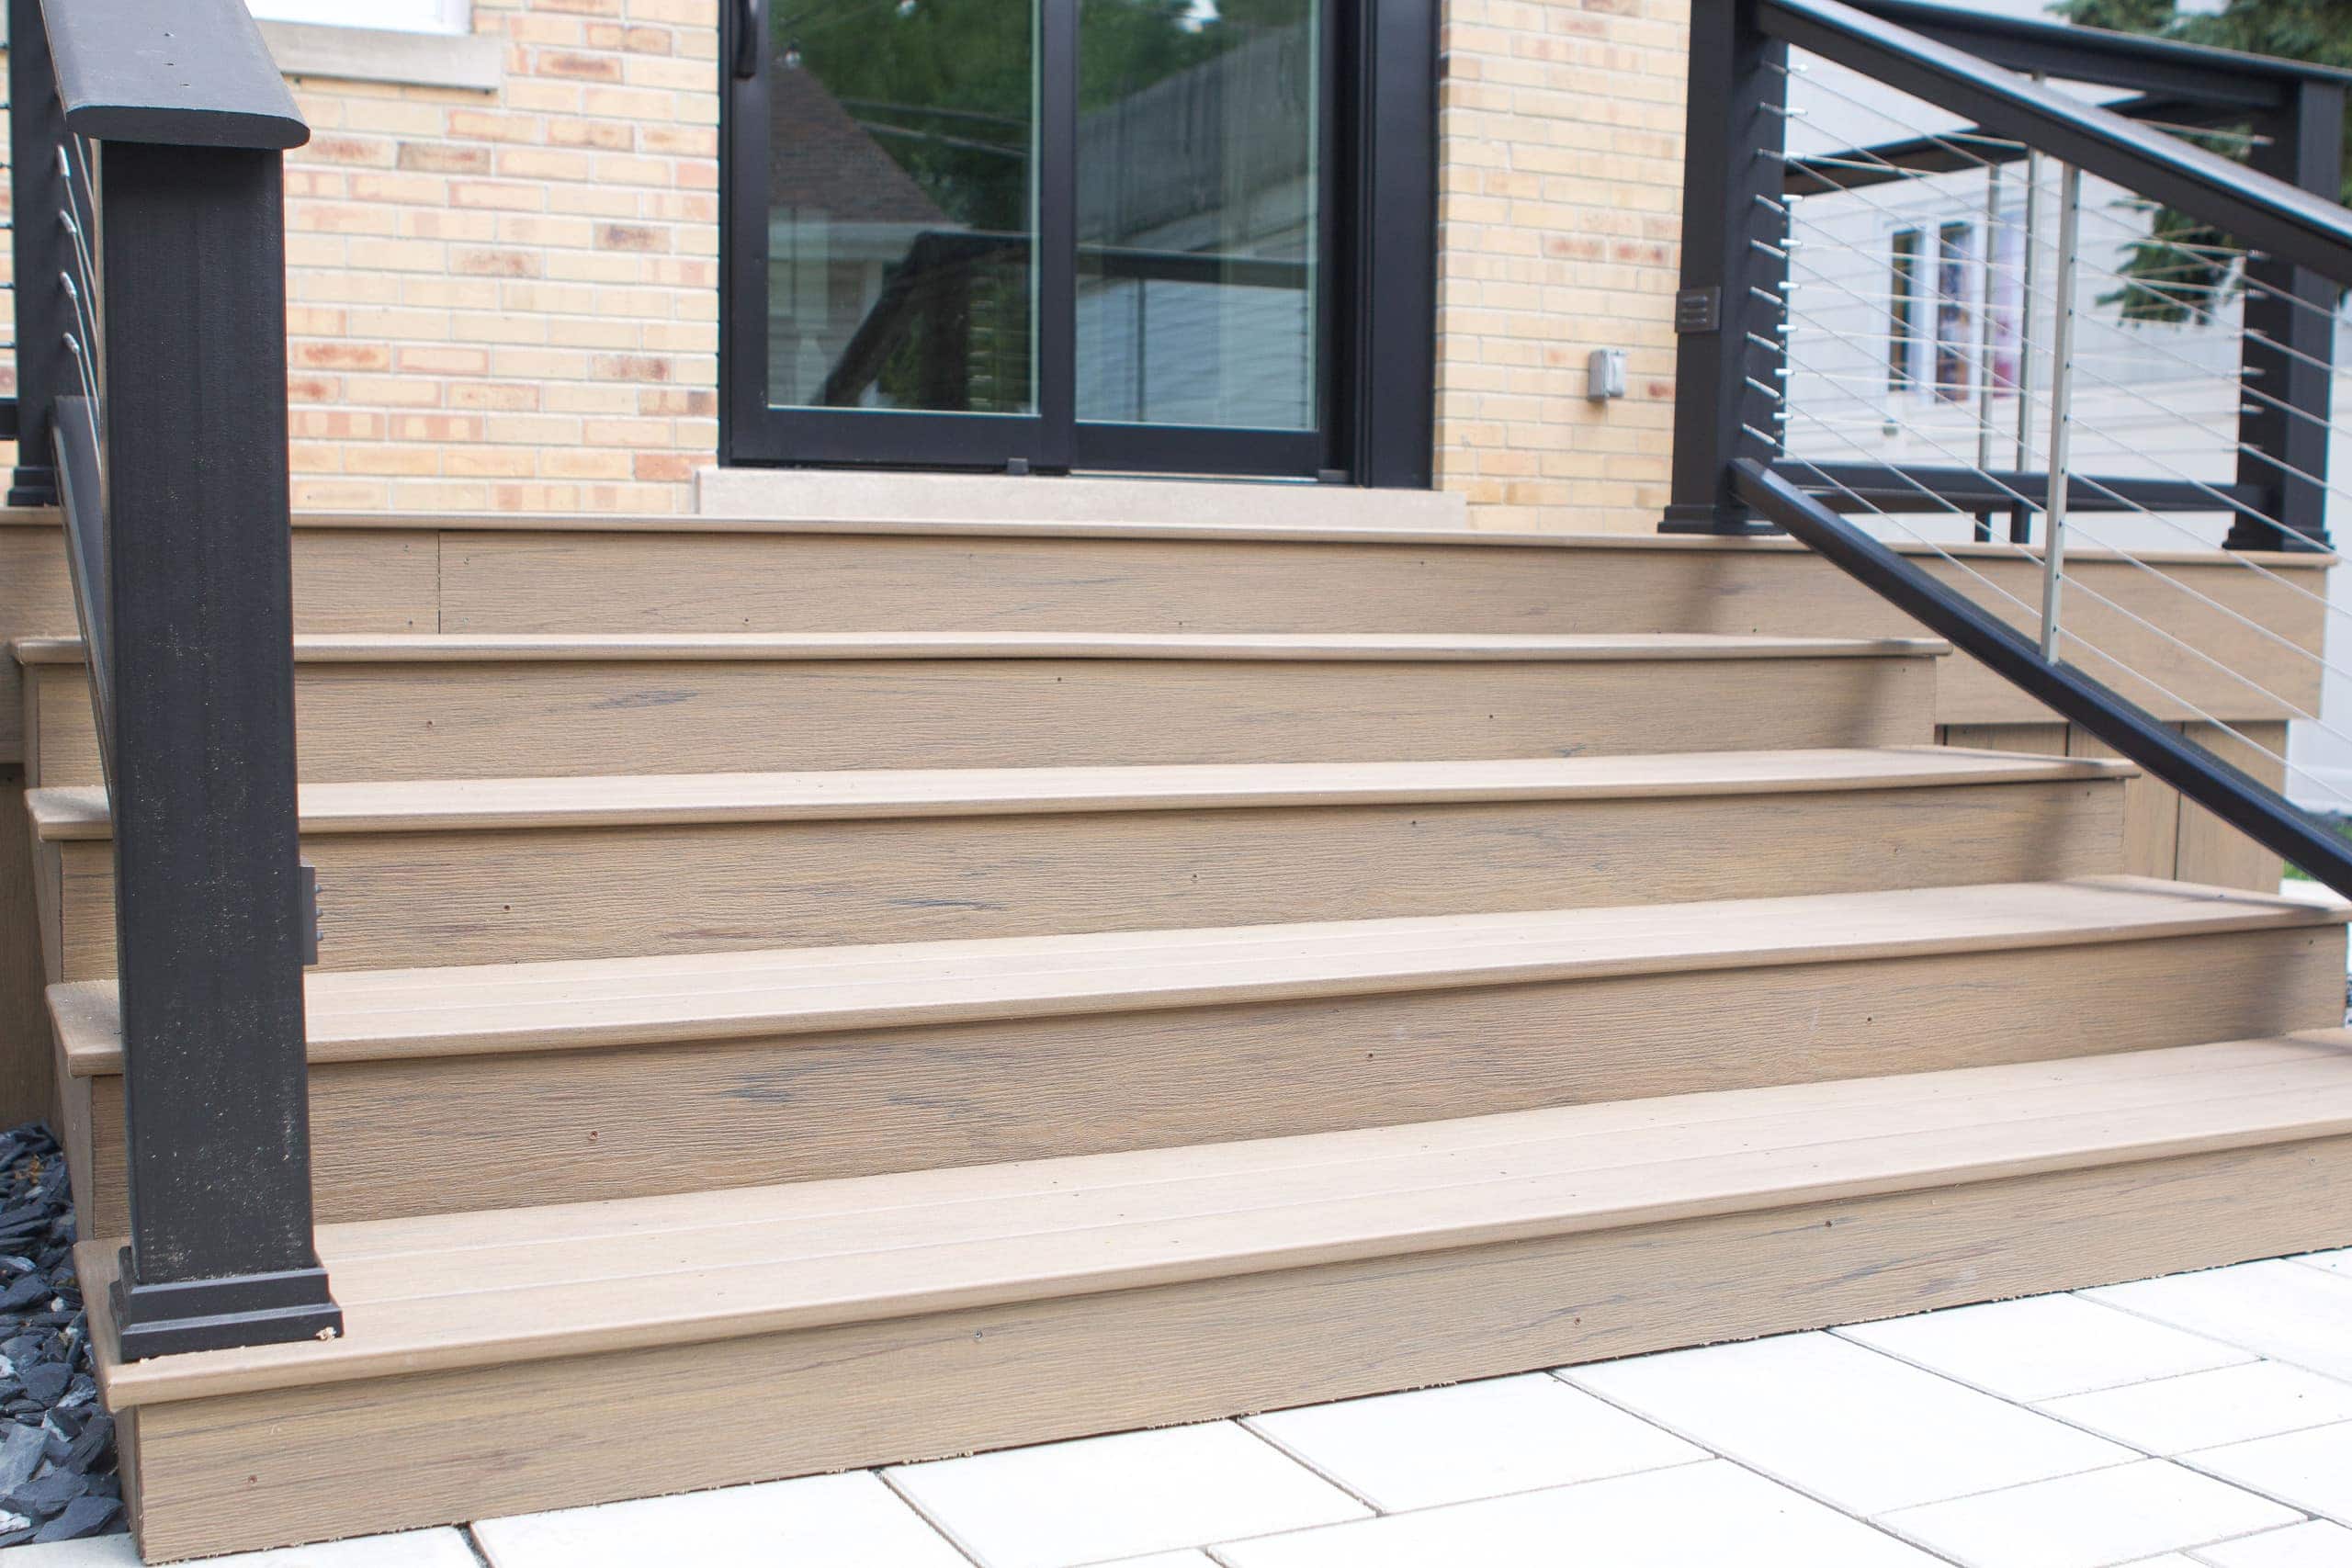 The wide stairs on our new composite decking from TimberTech